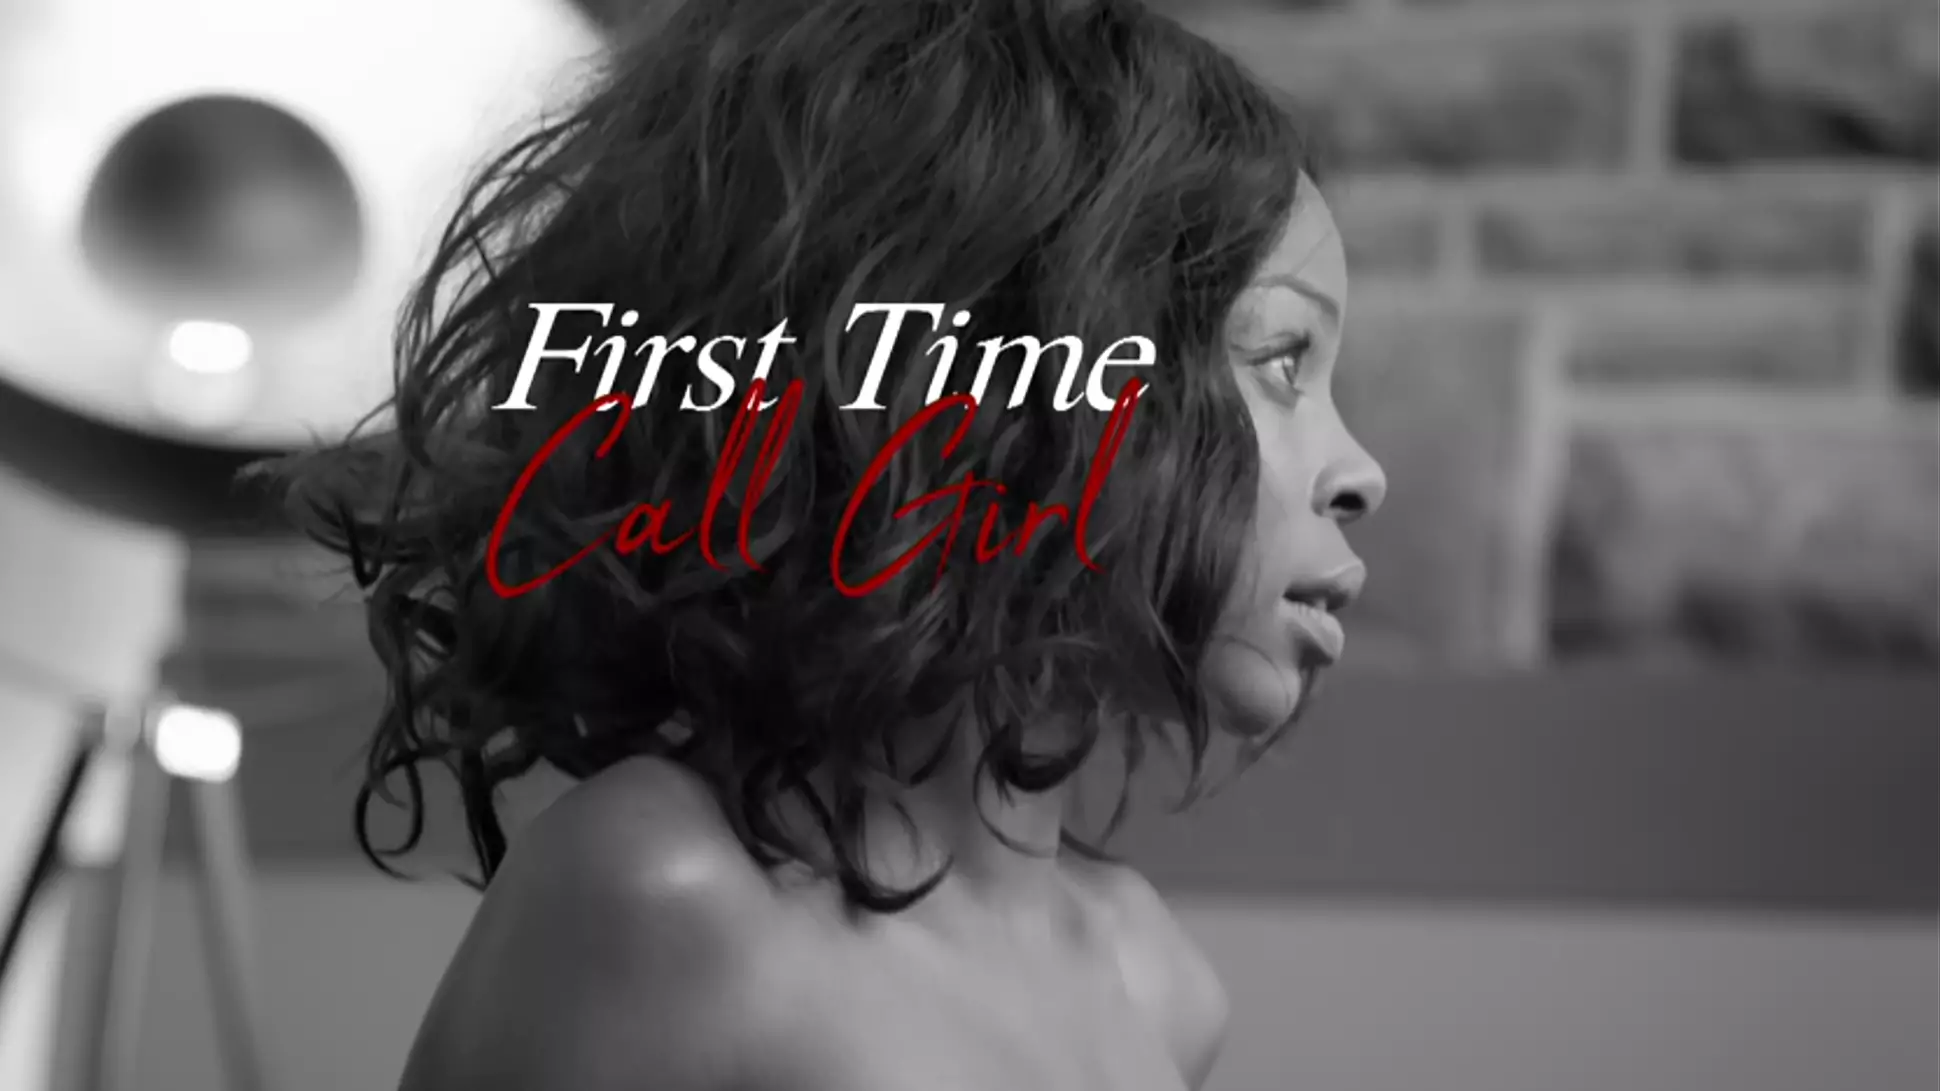 'First Time Call Girl' Is The Most Important Thing You Should Watch